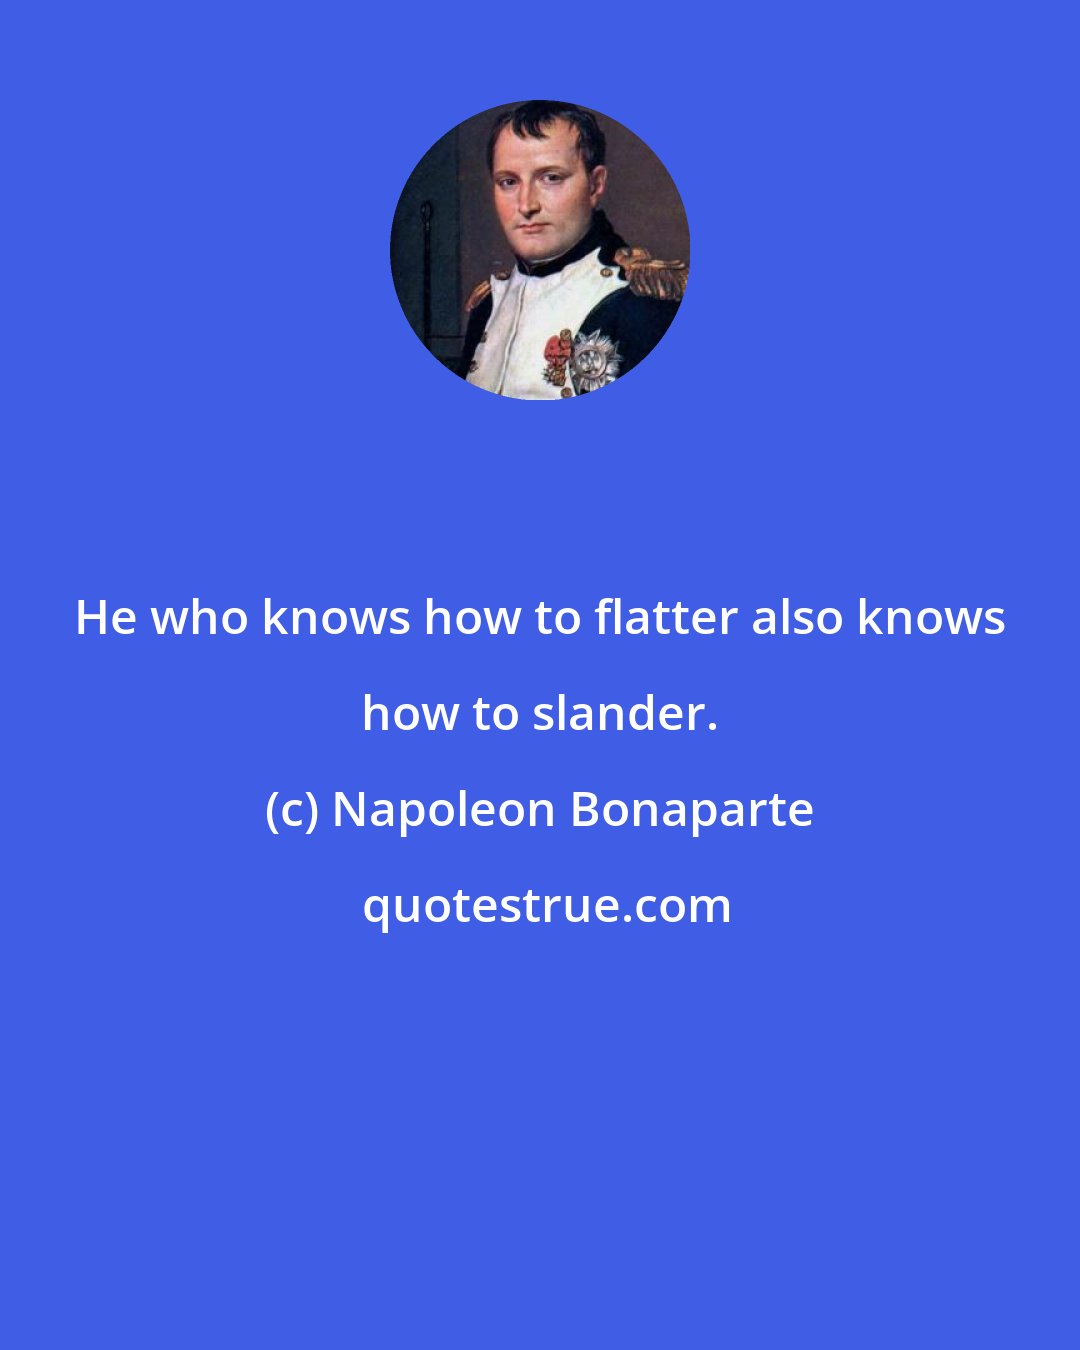 Napoleon Bonaparte: He who knows how to flatter also knows how to slander.